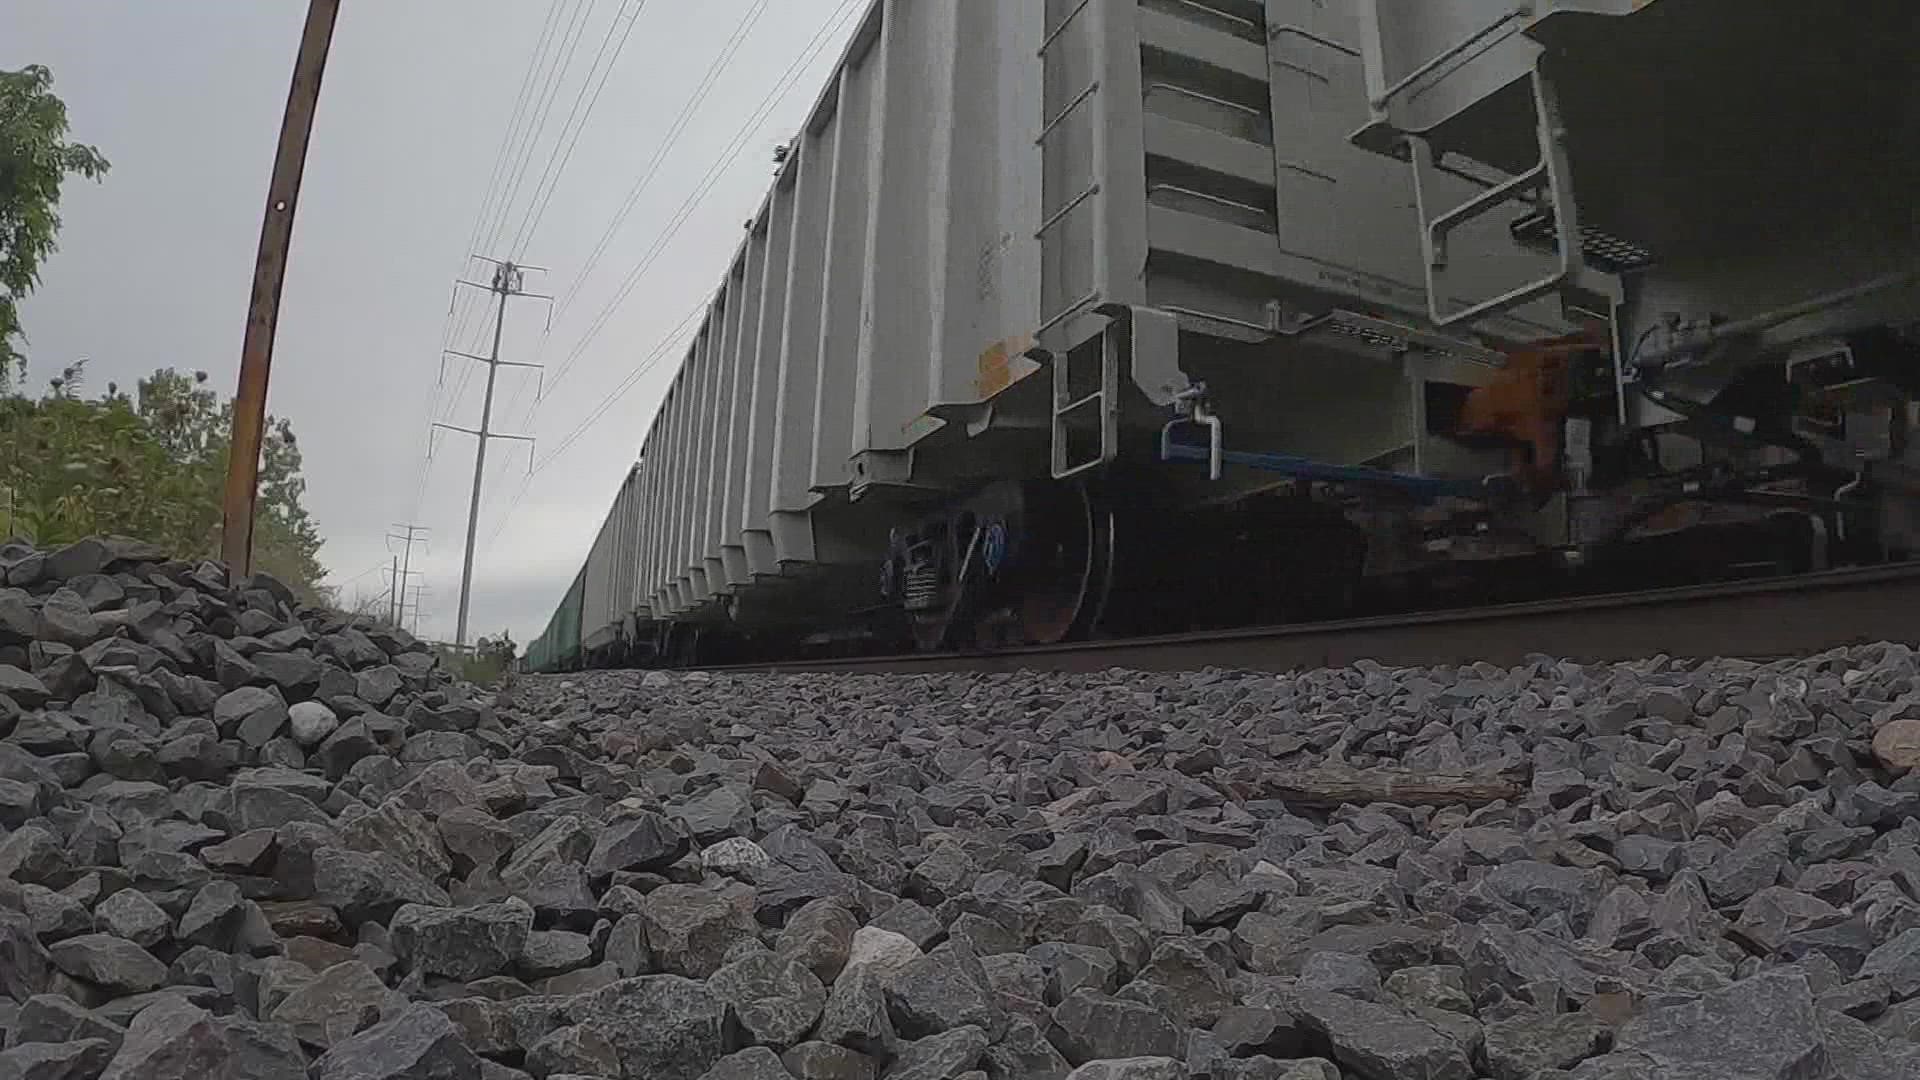 Four railroad unions are back at the table after rejecting their deals with the railroads, trying to work out new agreements before the Dec. 9 deadline.